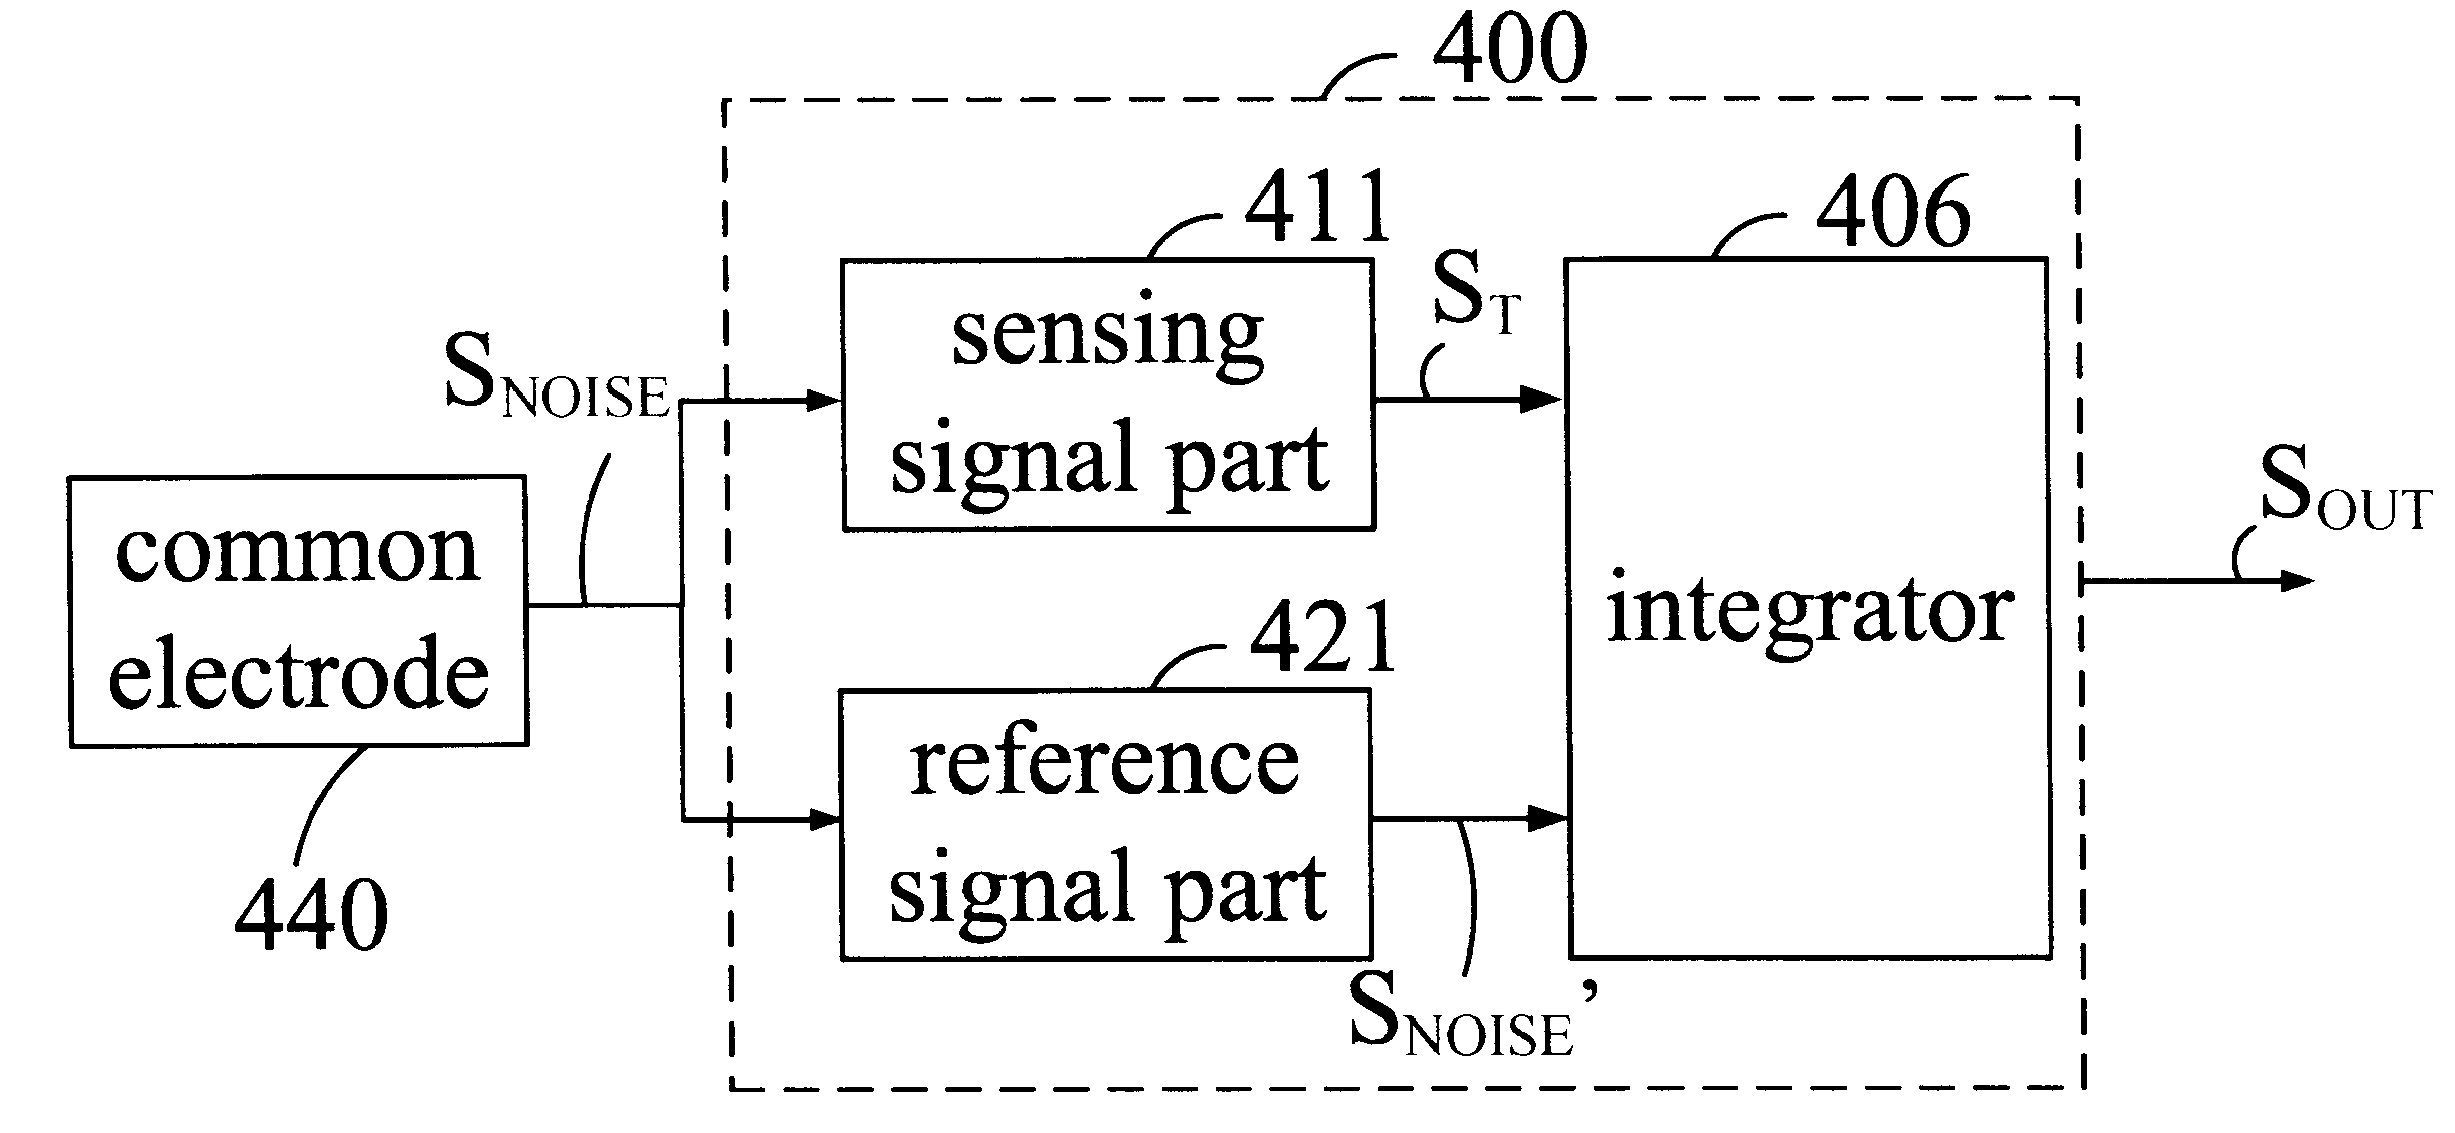 Sensing circuit for capacitive touch panel